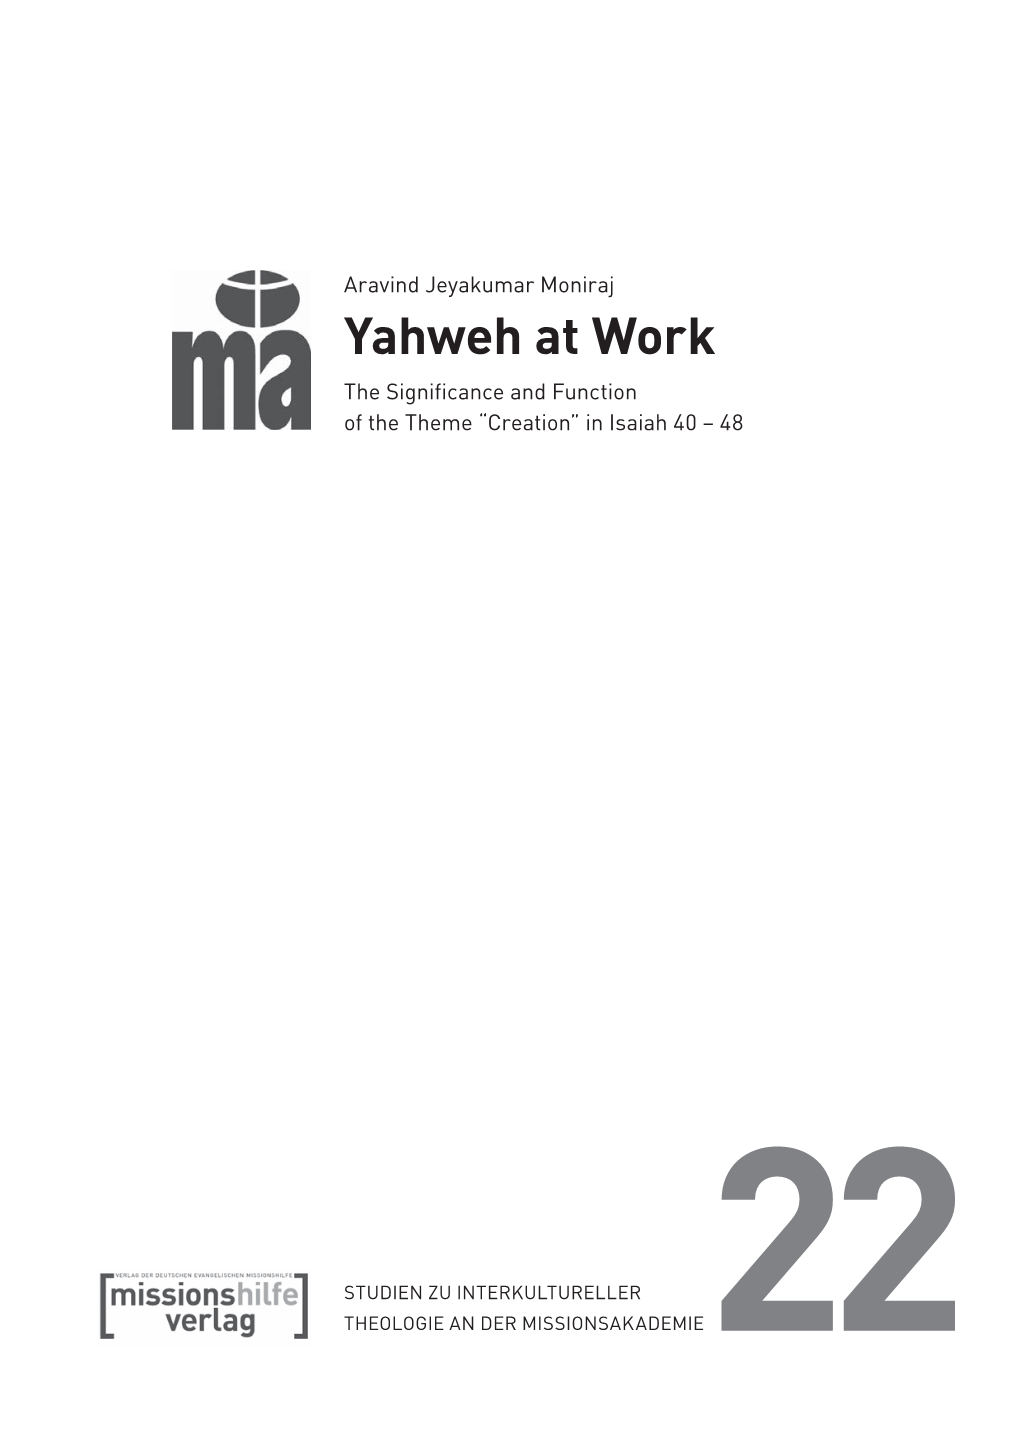 Yahweh at Work the Significance and Function of the Theme “Creation” in Isaiah 40 – 48